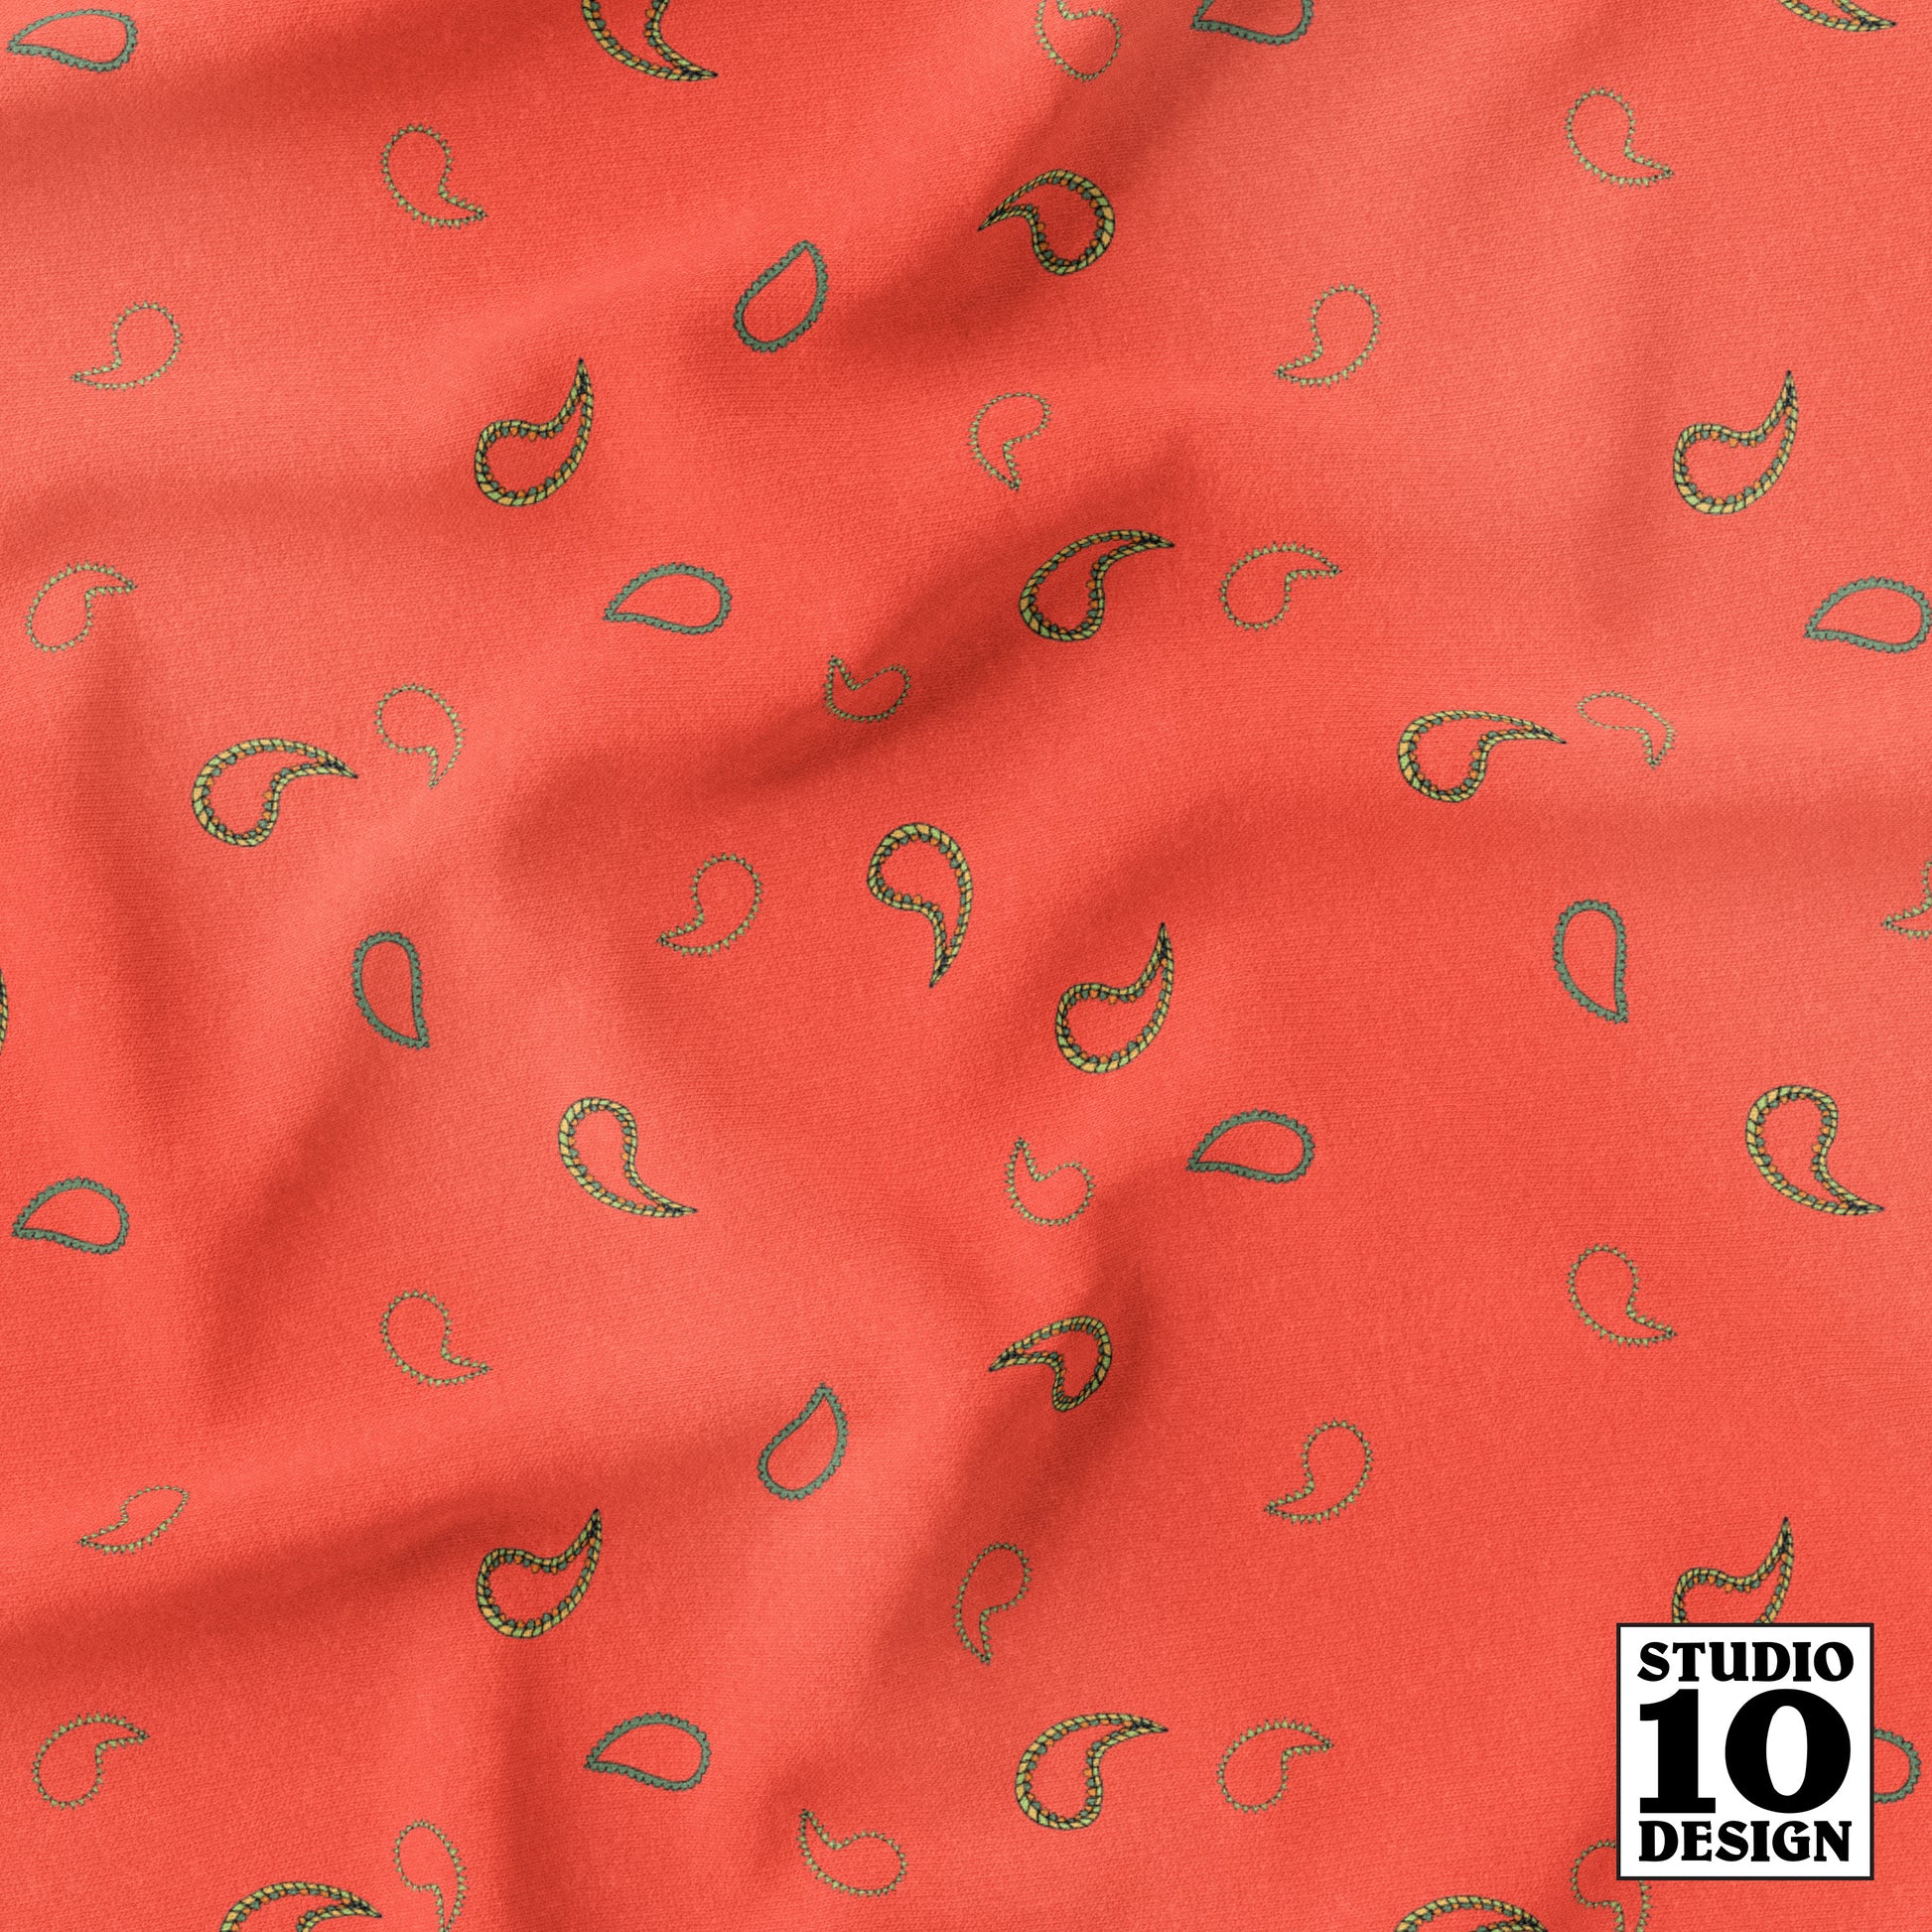 Ditsy Paisley Tomato Red Printed Fabric by Studio Ten Design